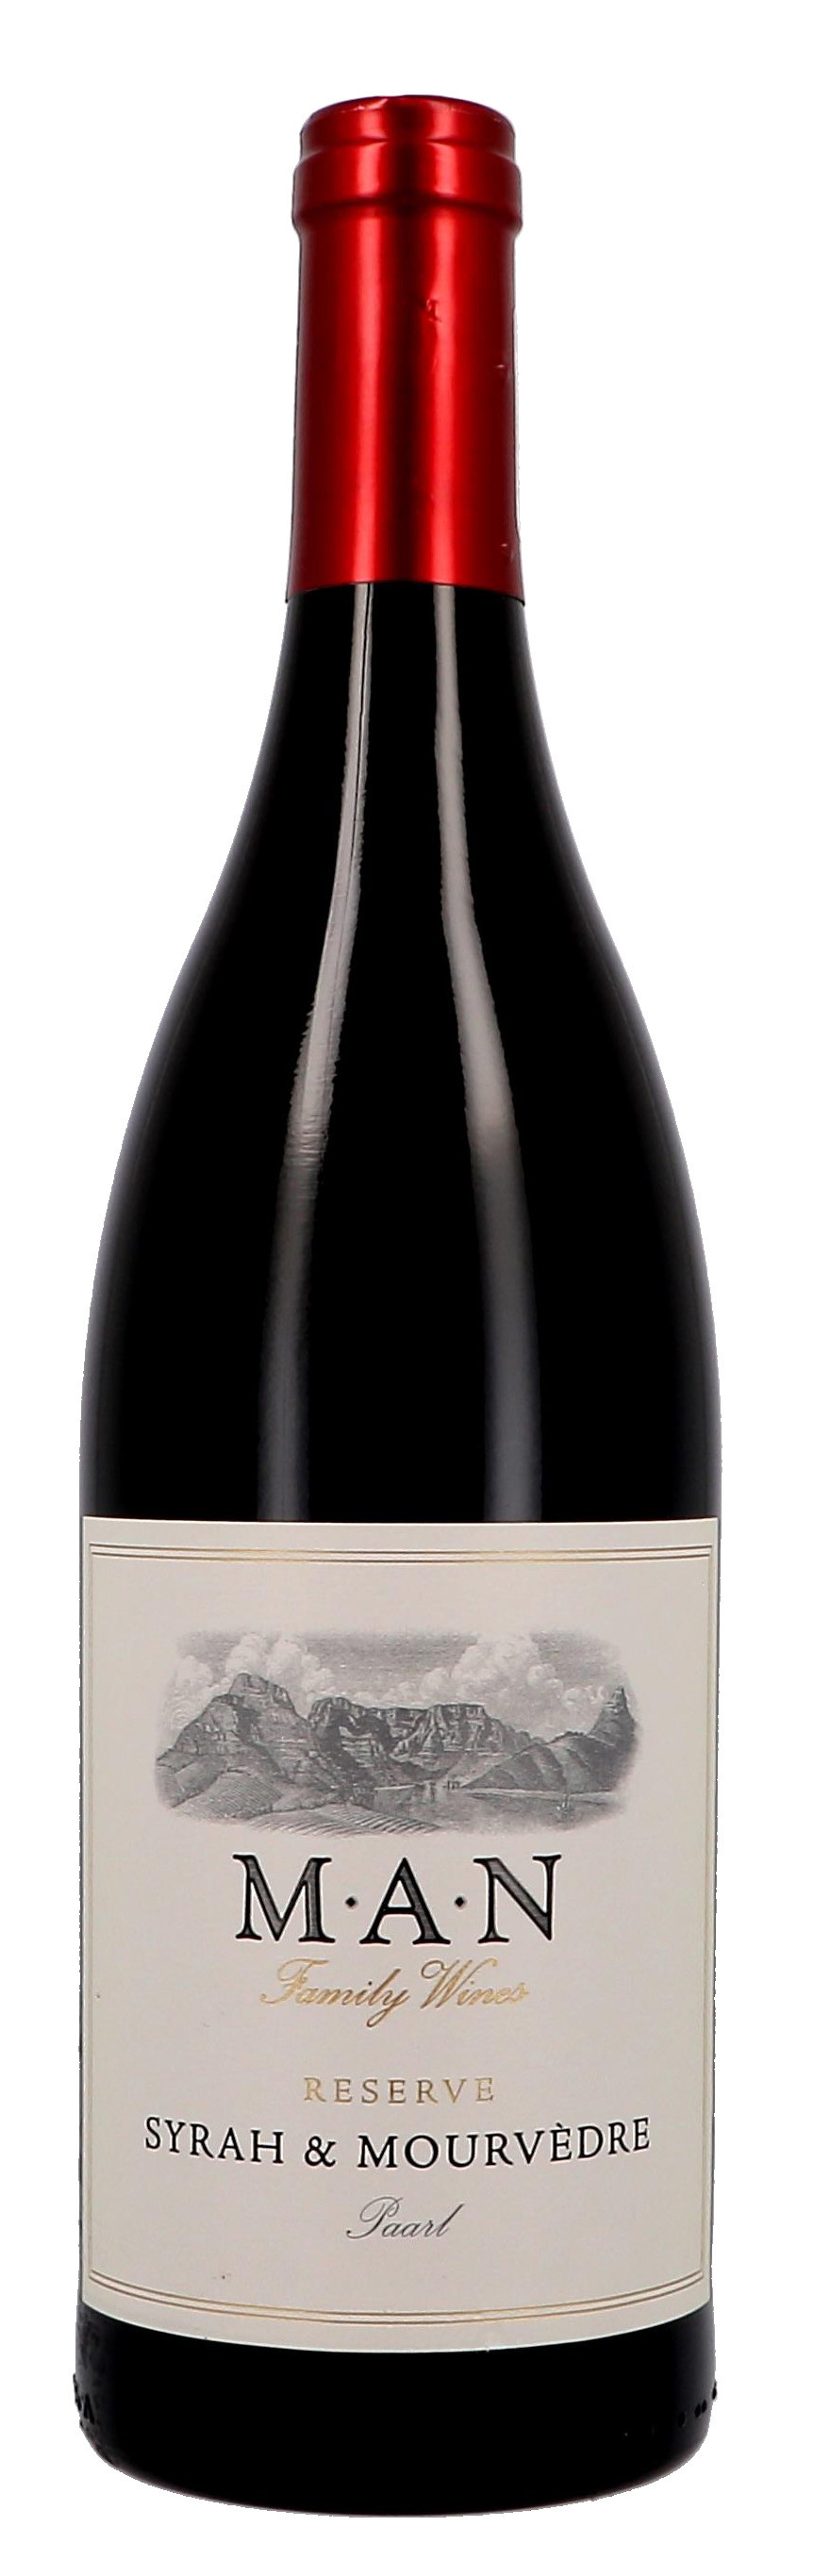 Syrah & Mourvedre Reserve 75cl 2015 MAN Family Wines (Wijnen)